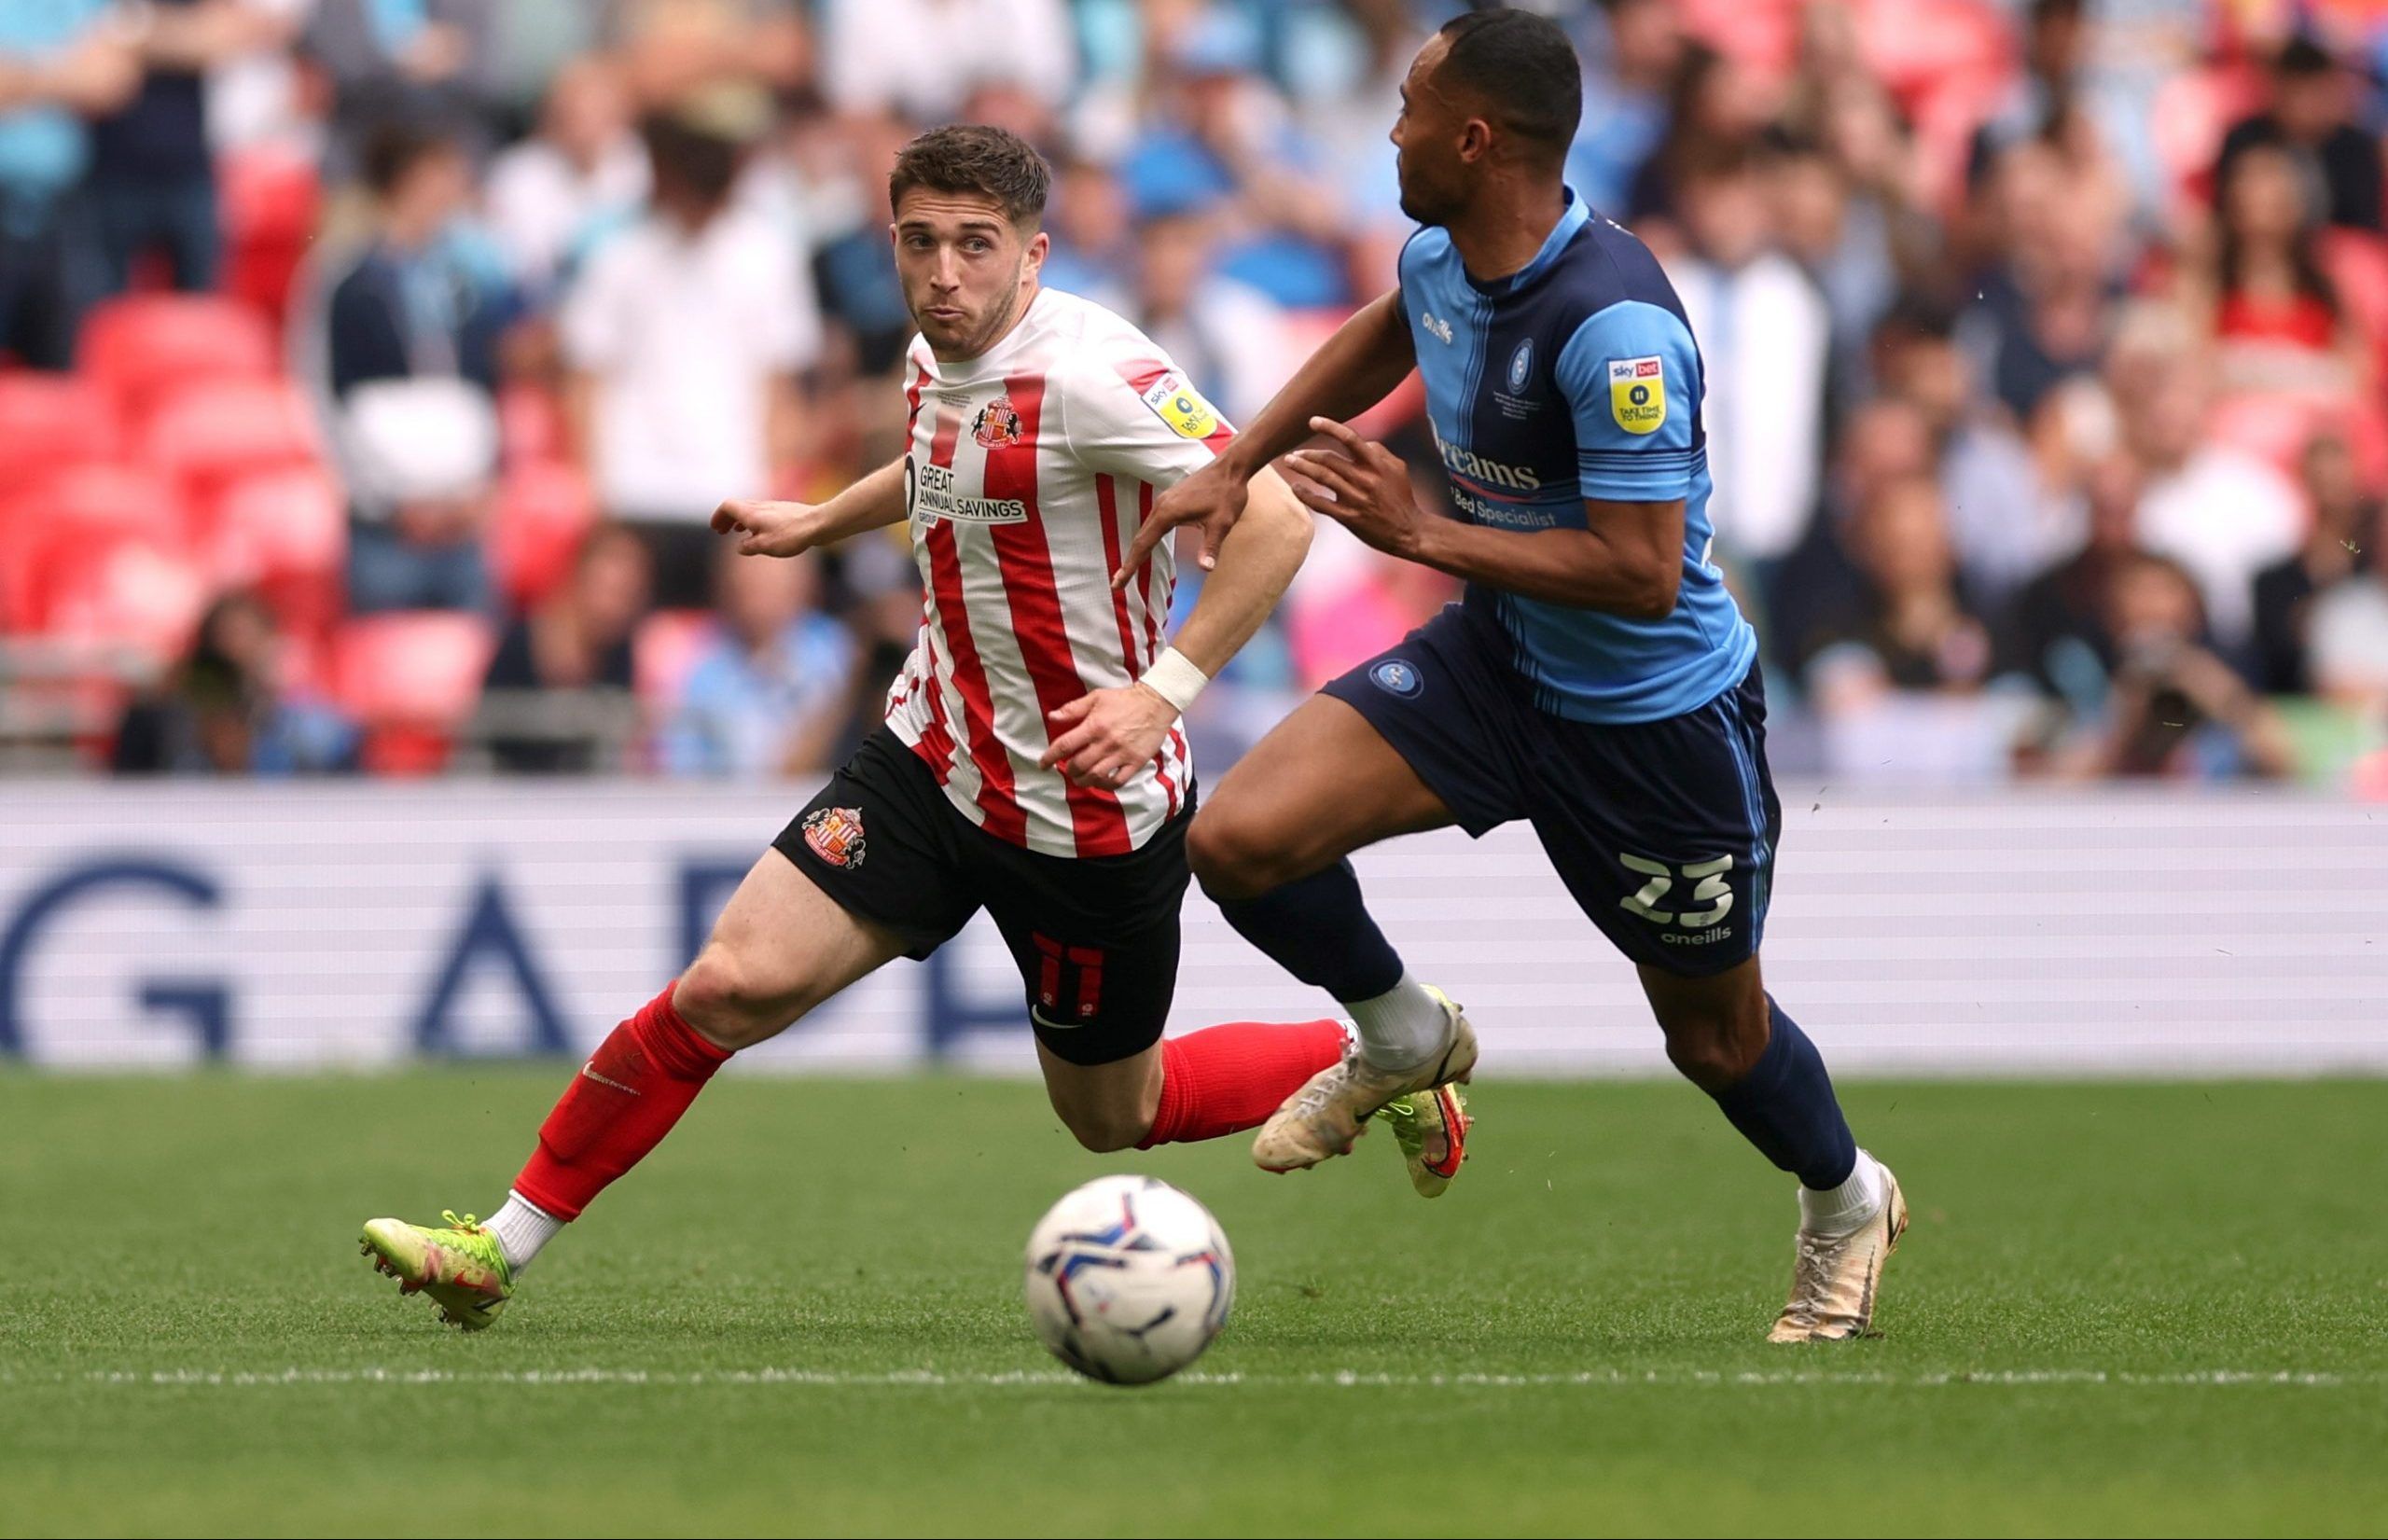 Soccer Football - League One Play-Off Final - Sunderland v Wycombe Wanderers - Wembley Stadium, London, Britain - May 21, 2022  Sunderland's Lynden Gooch in action with Wycombe Wanderers' Jordan Obita Action Images/Matthew Childs EDITORIAL USE ONLY. No use with unauthorized audio, video, data, fixture lists, club/league logos or 'live' services. Online in-match use limited to 75 images, no video emulation. No use in betting, games or single club /league/player publications.  Please contact your 